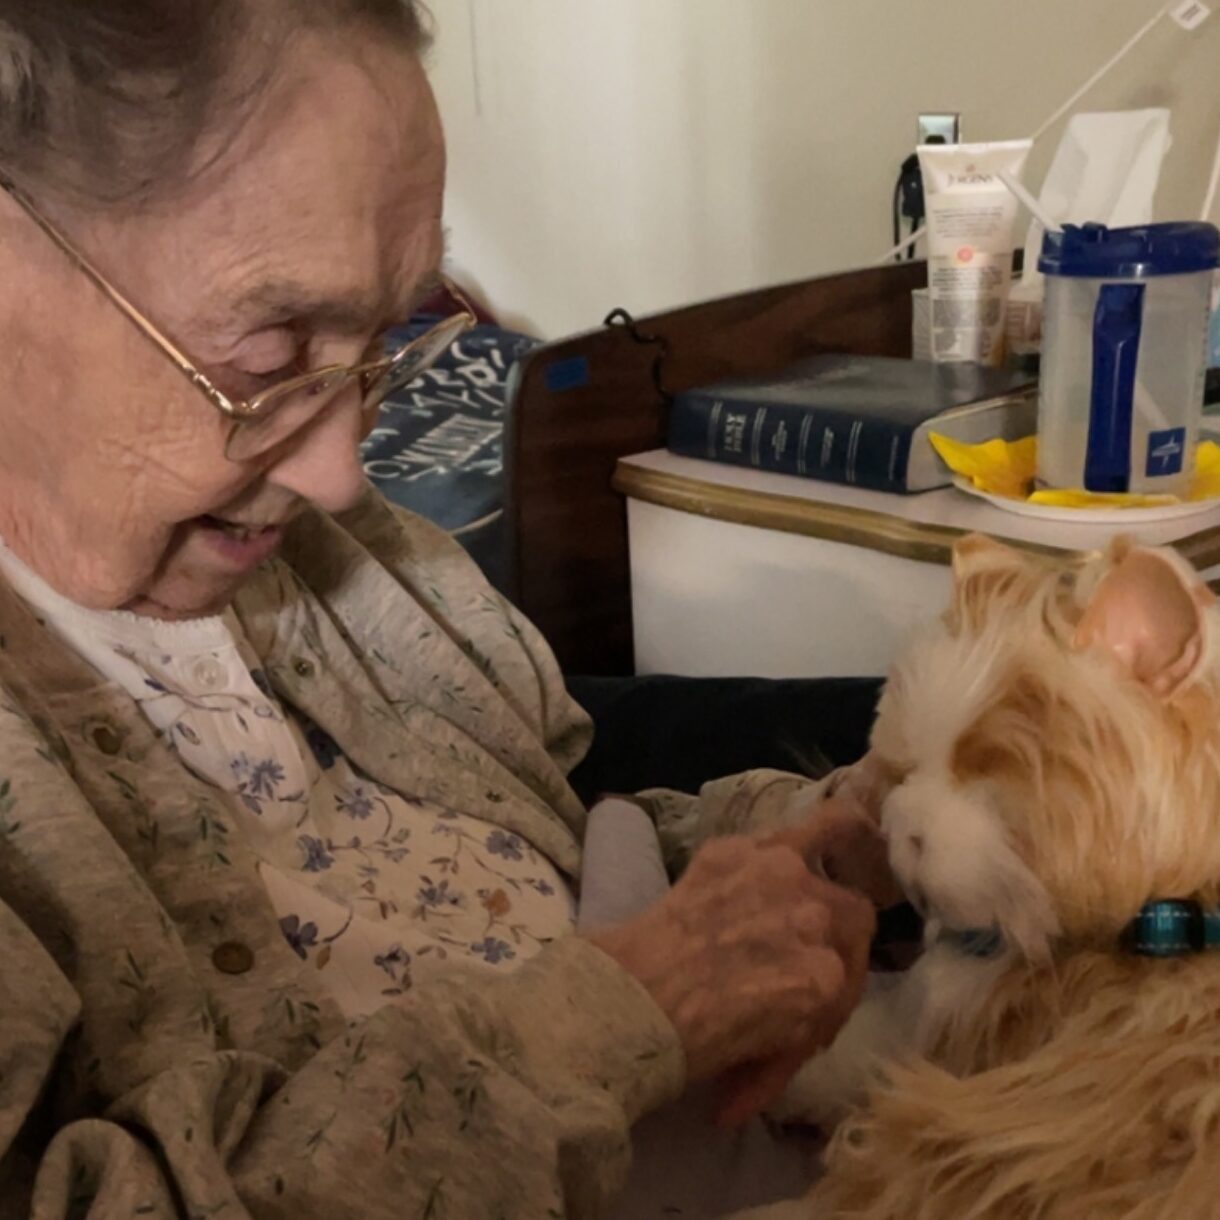 Hospice patient Martha pets her AI therapy cat. The cat is tan and white with a blue collar.